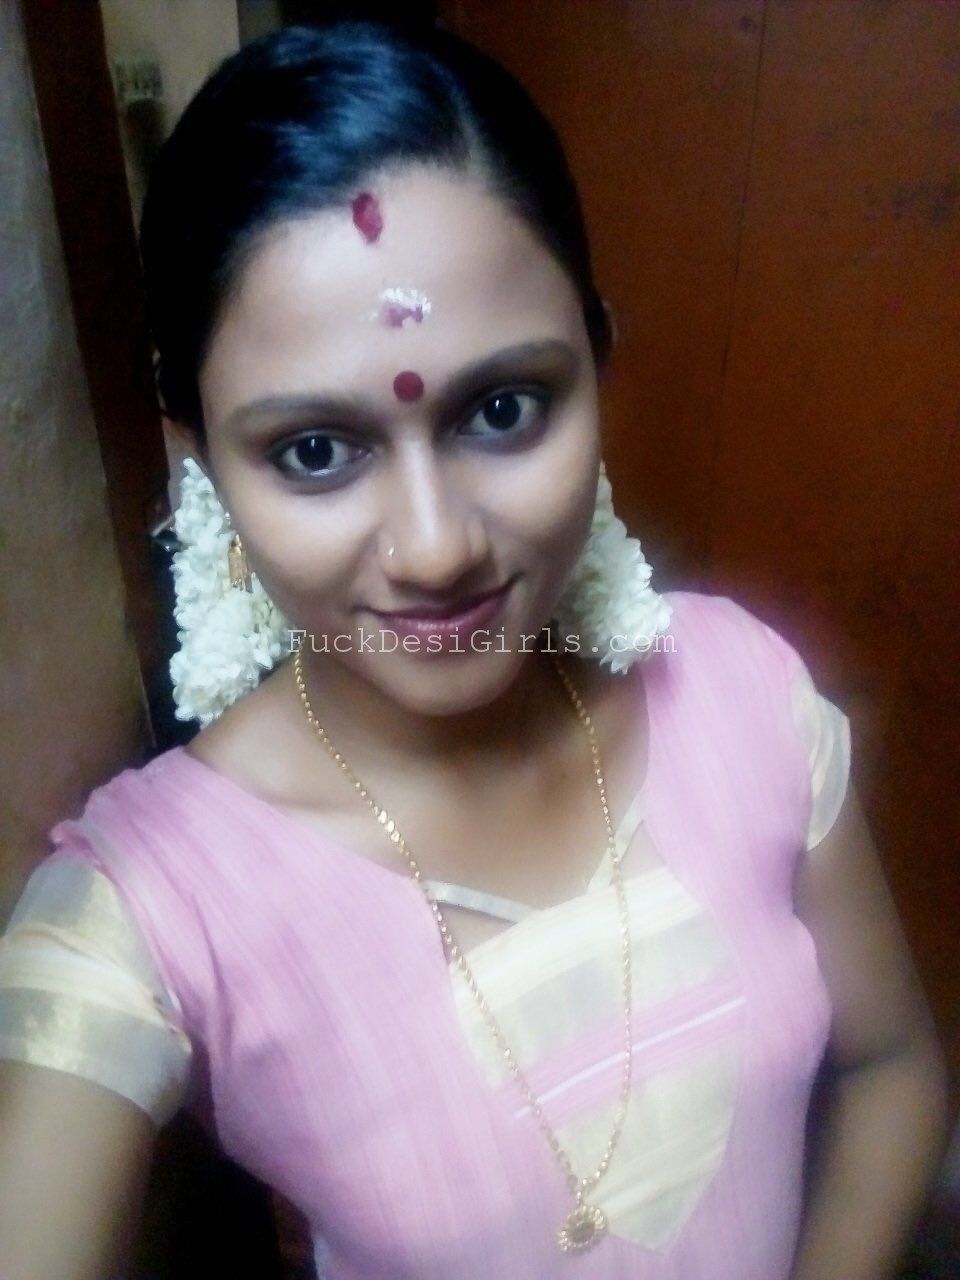 Tamil Girls Nude Pic Without Face Telegraph